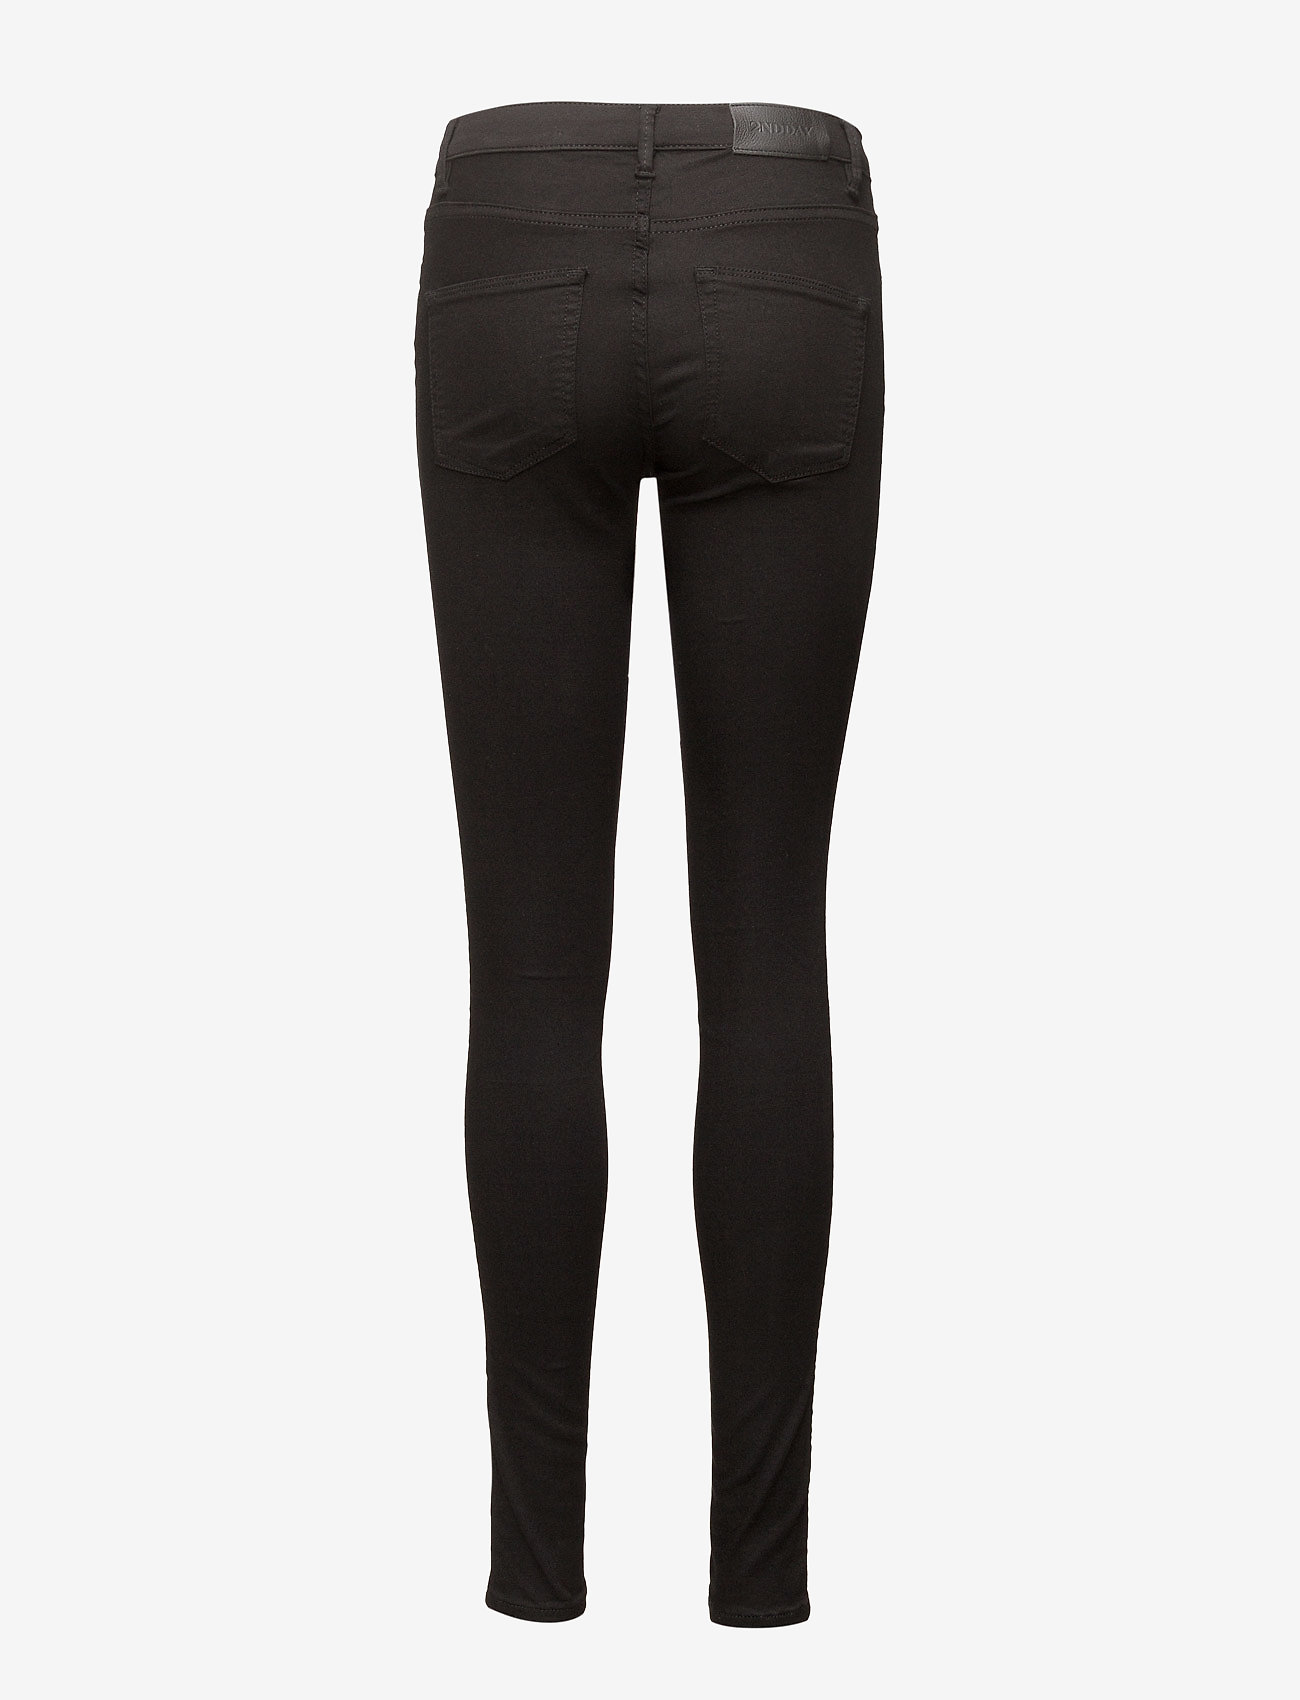 2NDDAY - 2ND Jolie Perfect Blacked - skinny jeans - black - 1